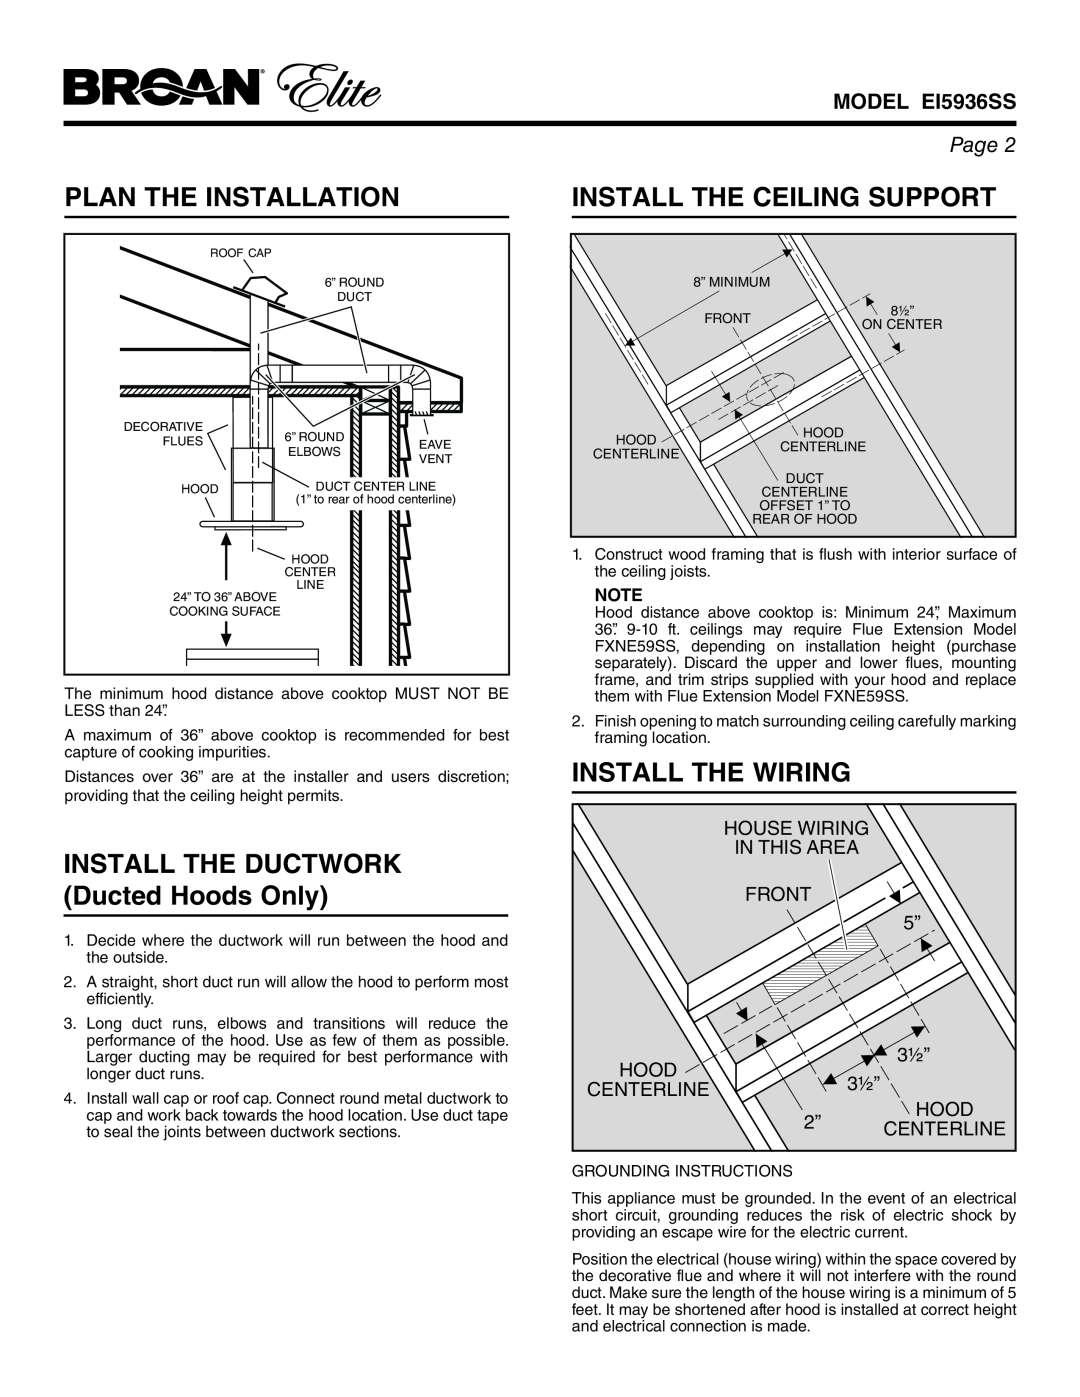 Broan EI5936SS Plan The Installation, INSTALL THE DUCTWORK Ducted Hoods Only, Install The Ceiling Support, House Wiring 